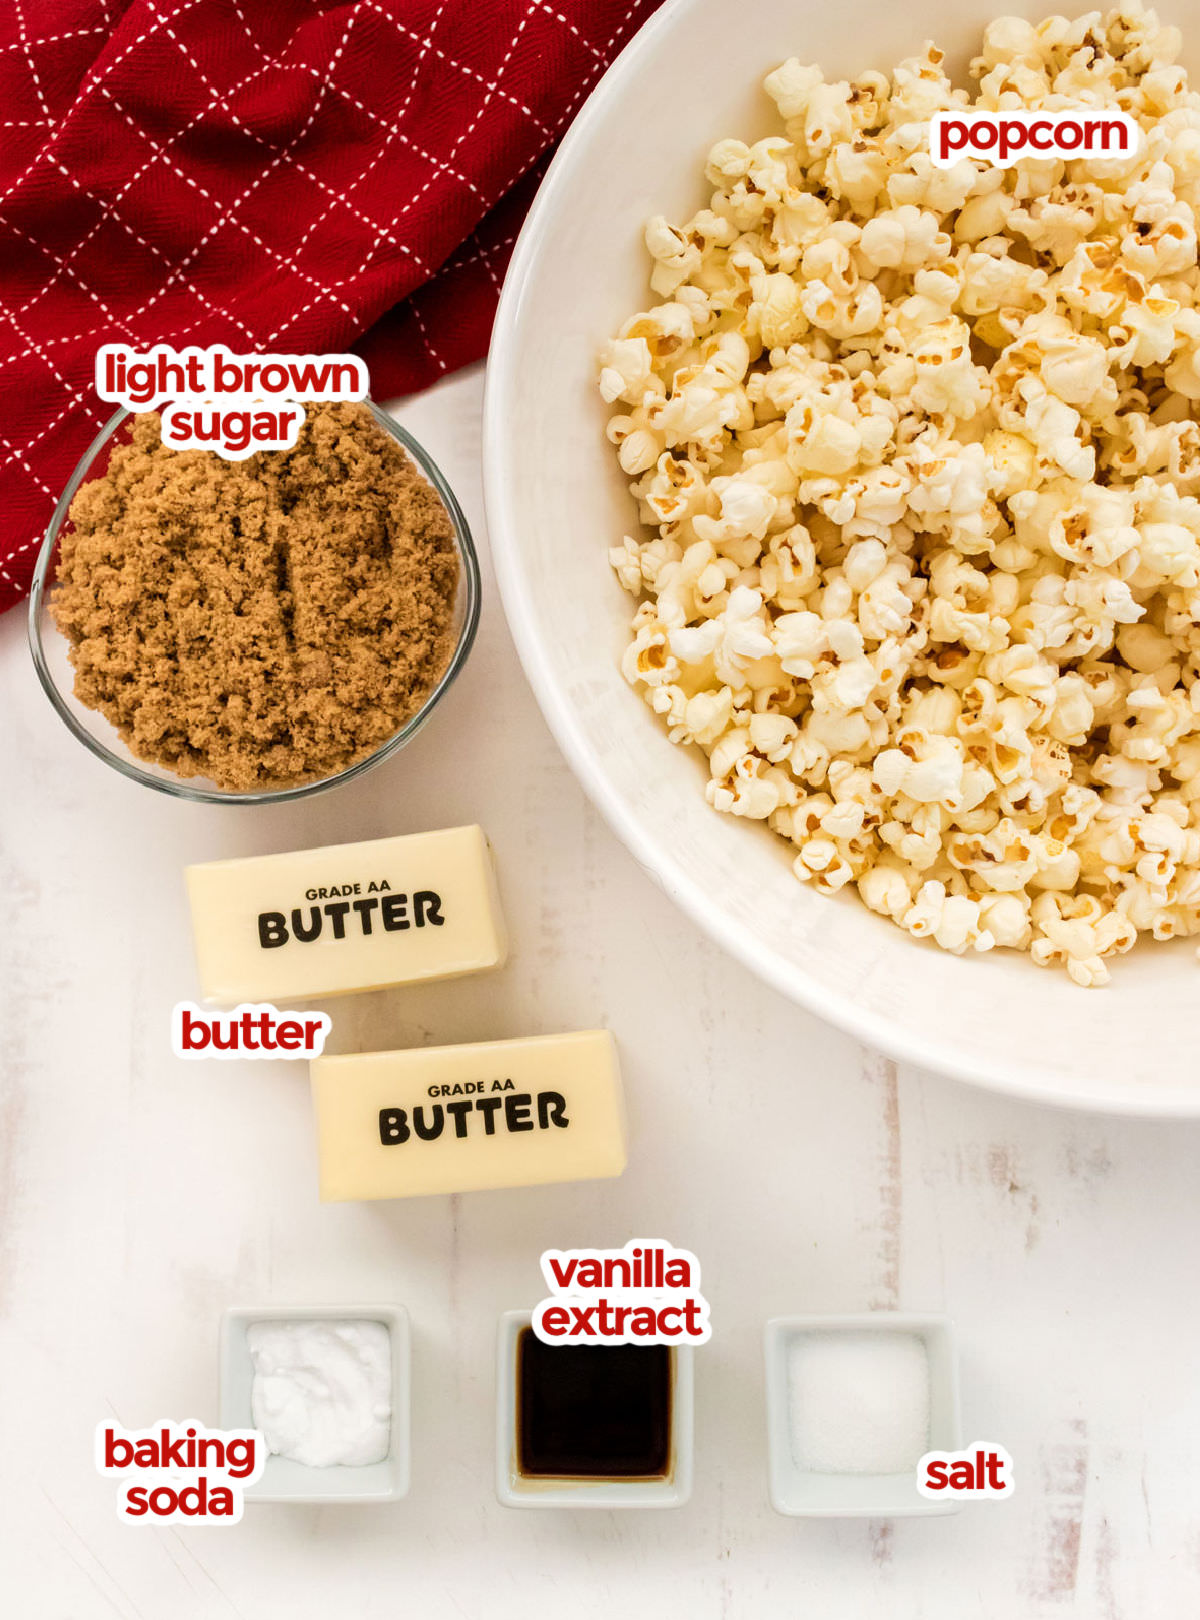 All the ingredients you will need to make Easy Homemade Caramel Corn including popcorn, butter, brown sugar, vanilla extract, salt and baking soda.